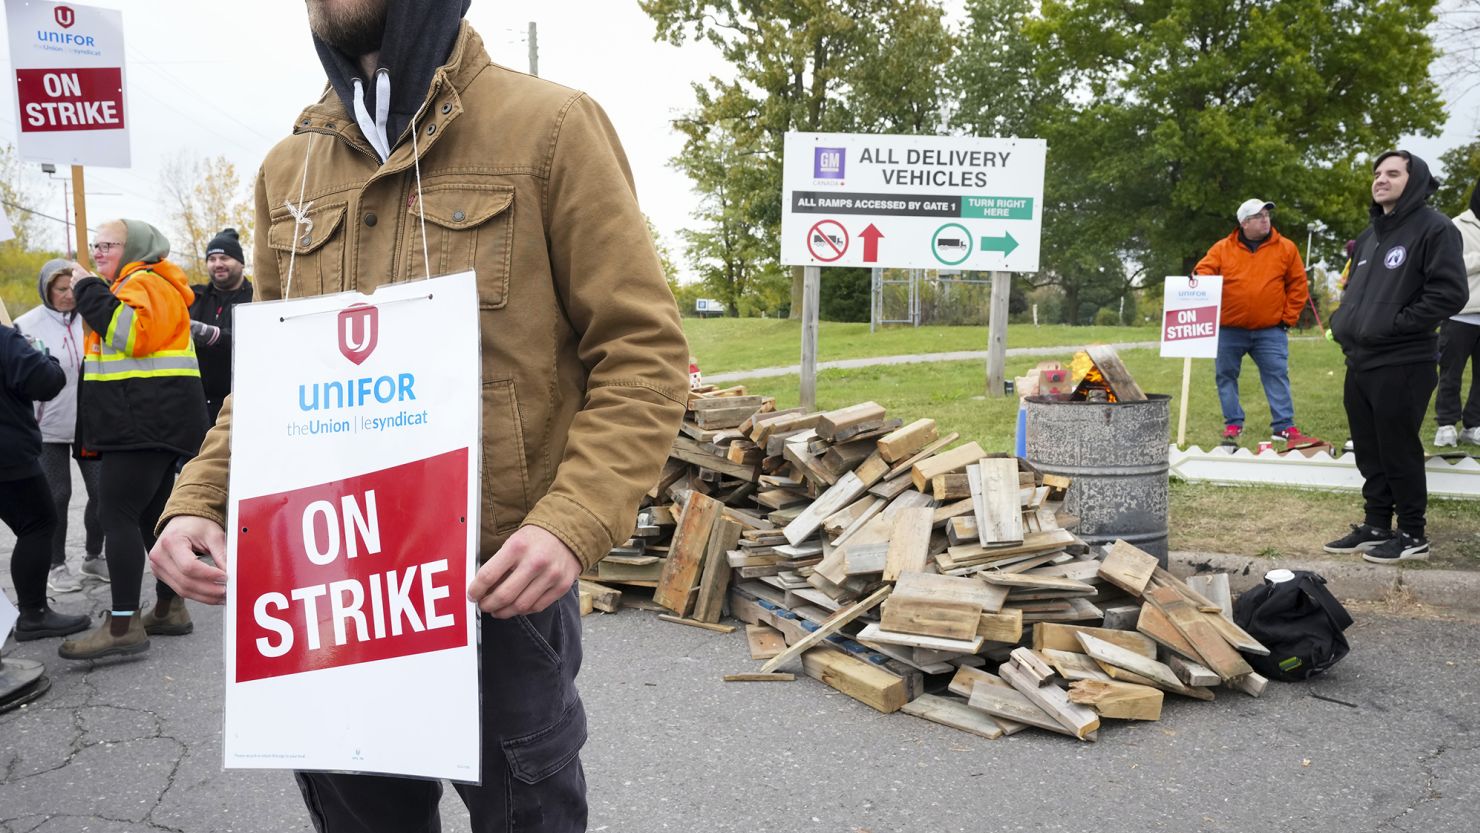 Unifor workers strike outside the General Motors St. Catharines powertrain plant in St. Catharines, Ontario. The strike by Unifor lasted less than a day, and a ratification vote Sunday averted the chance the strike would be resumed.